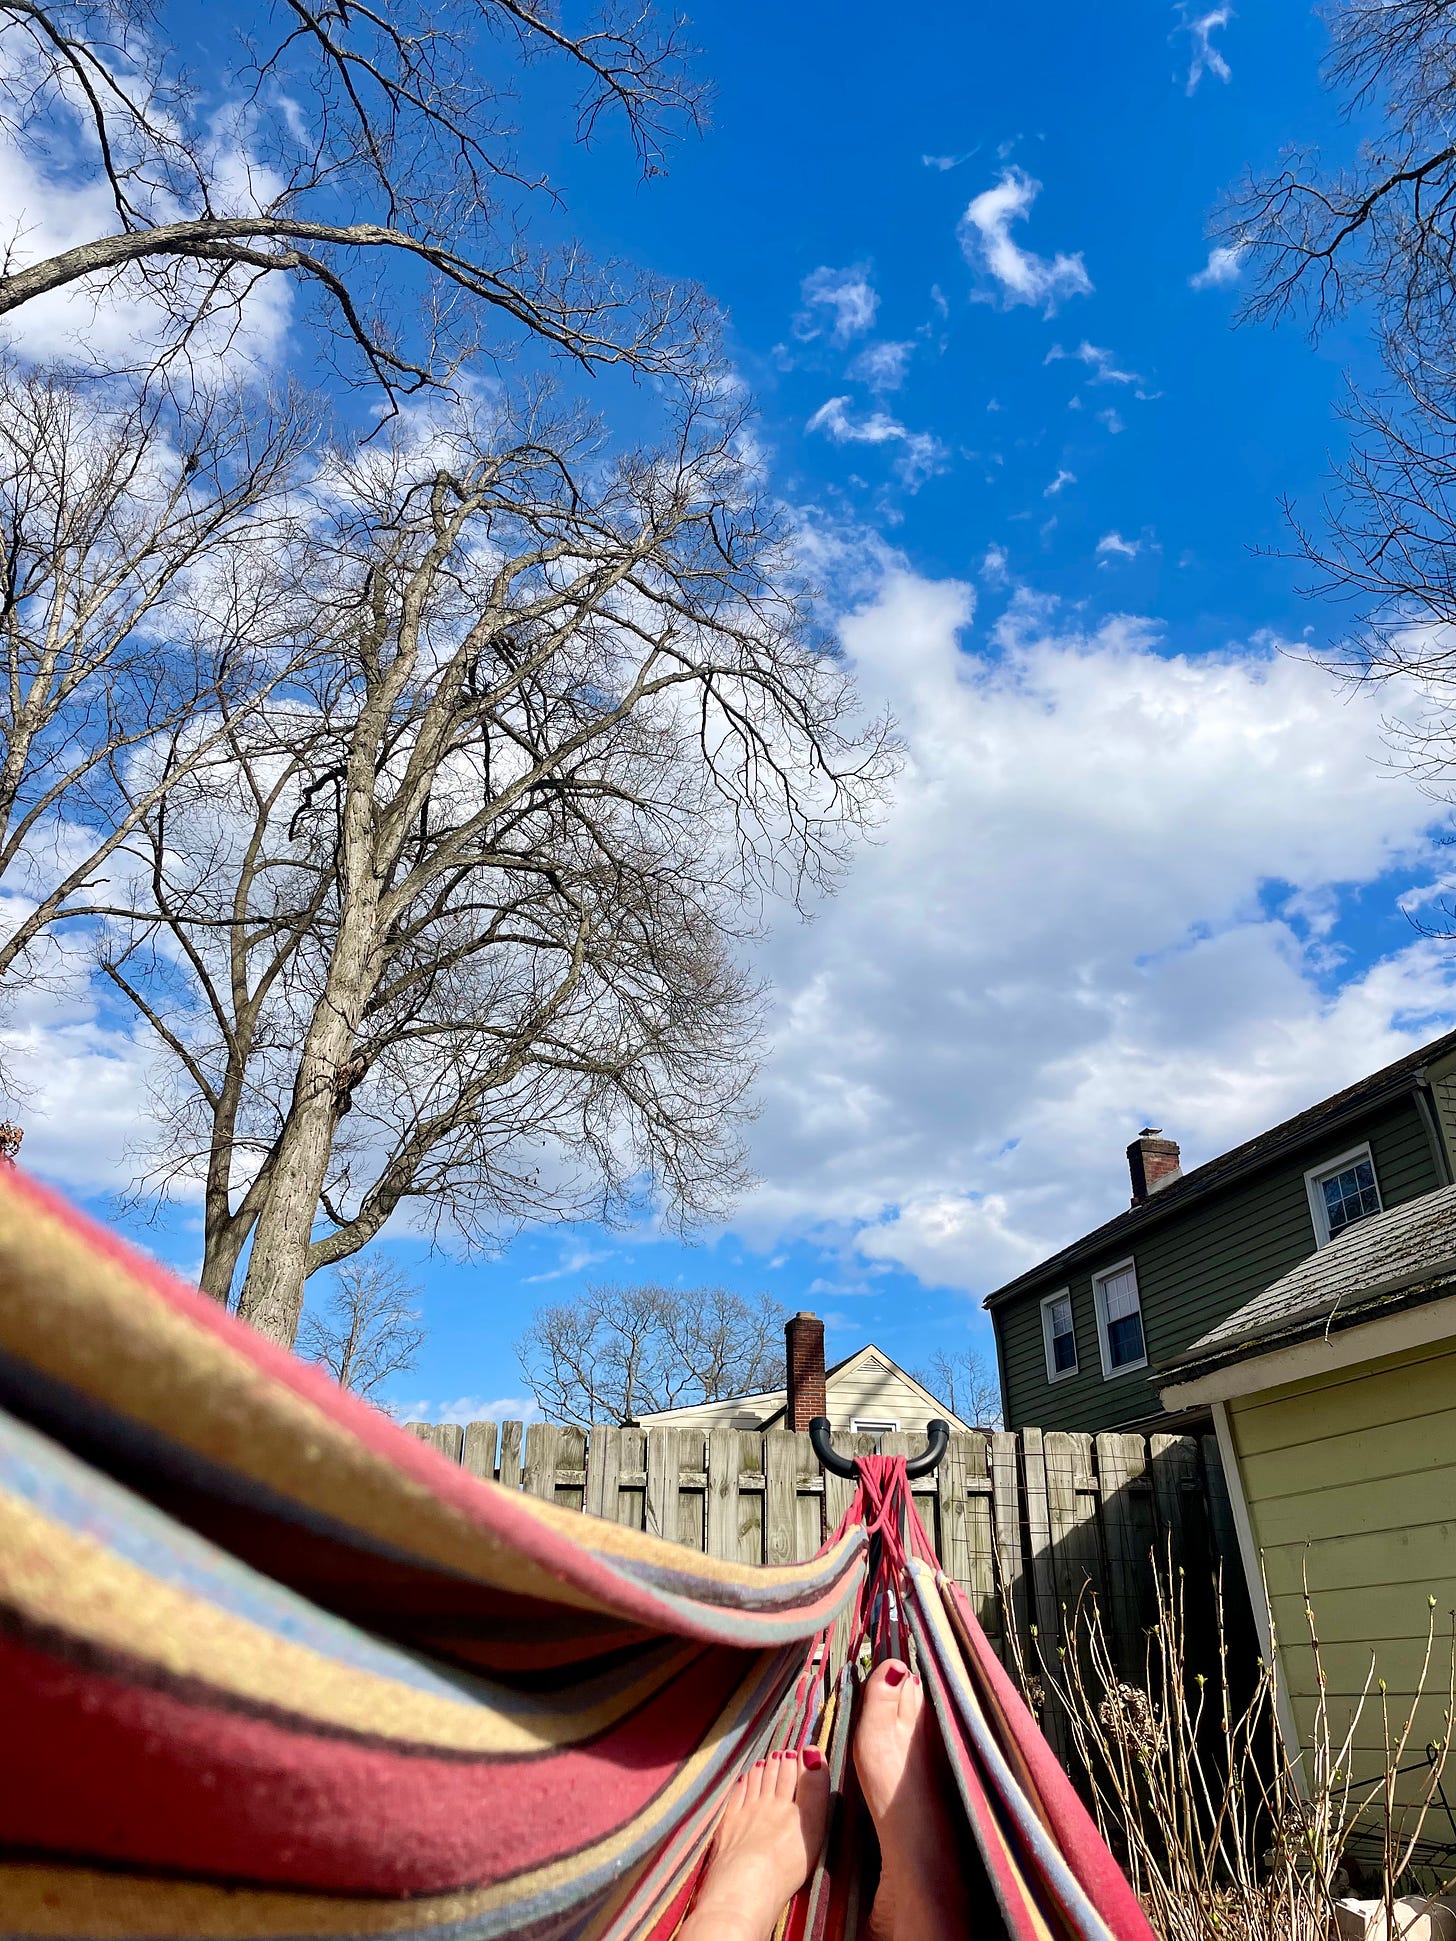 A red and yellow striped hammock against blue sky with white clouds and bare winter trees.